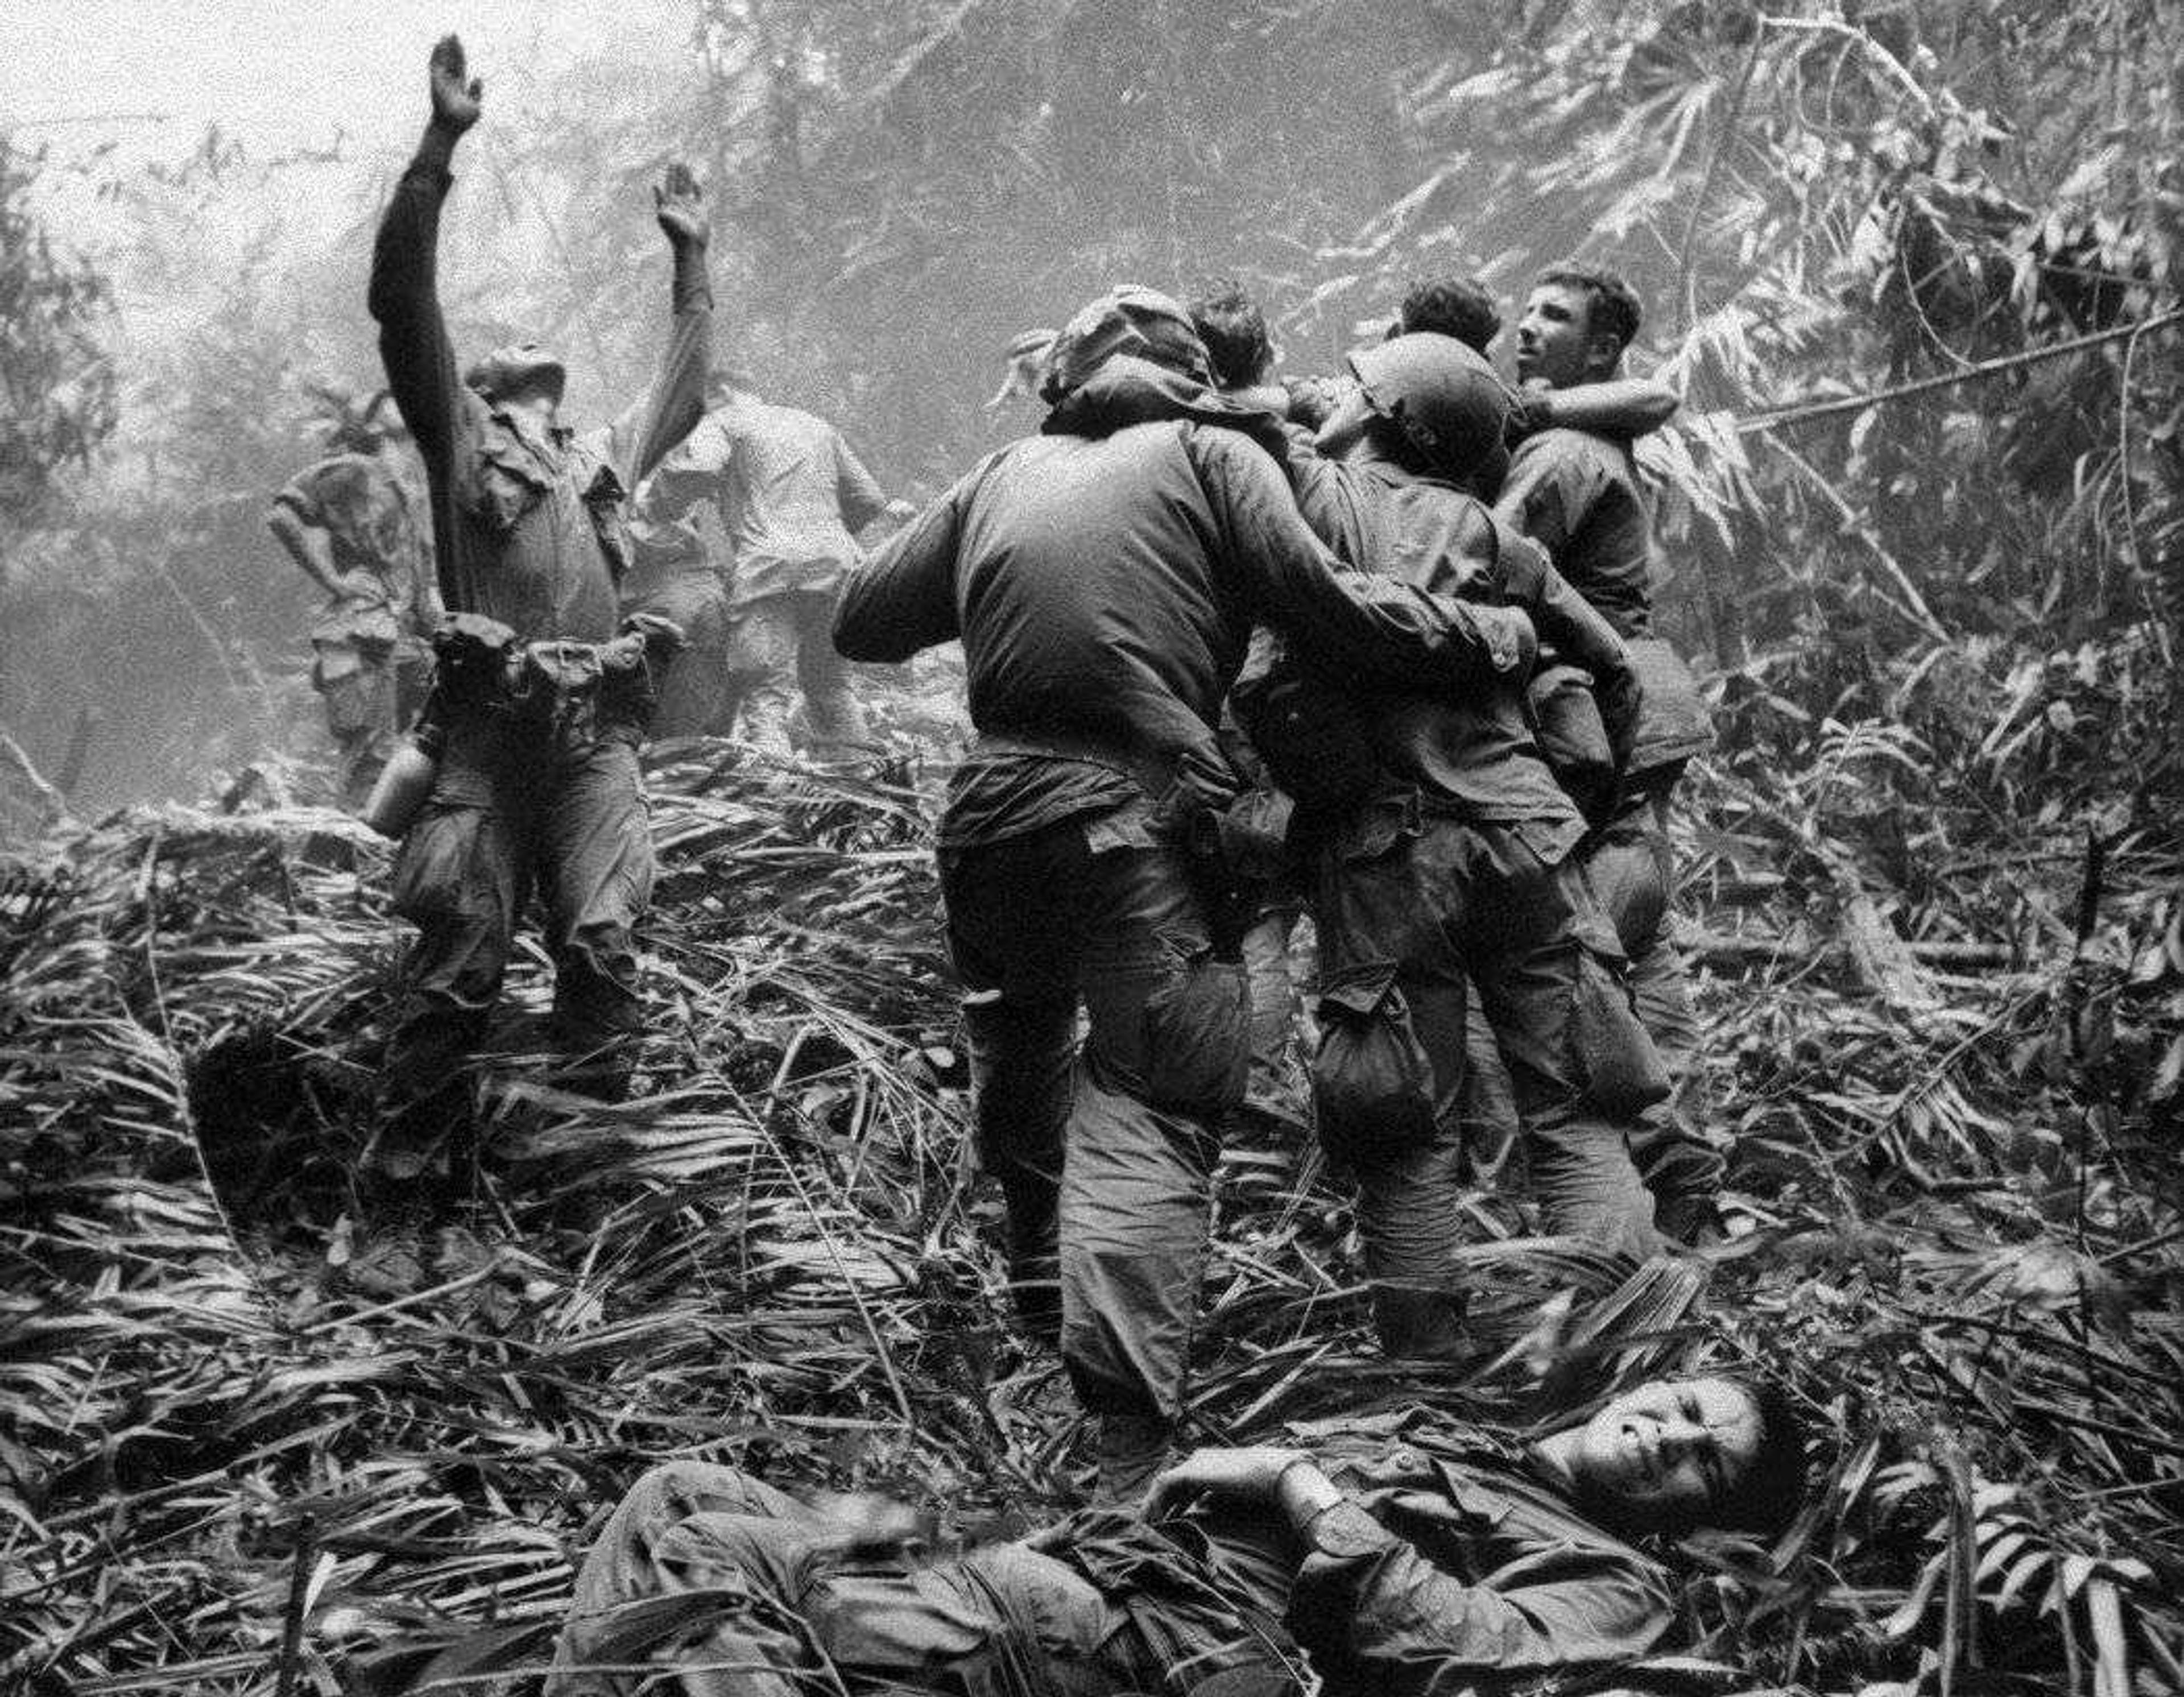 Marine Grunts make ready for an arriving Medivac helicopter in the aftermath of battle through deep jungle.